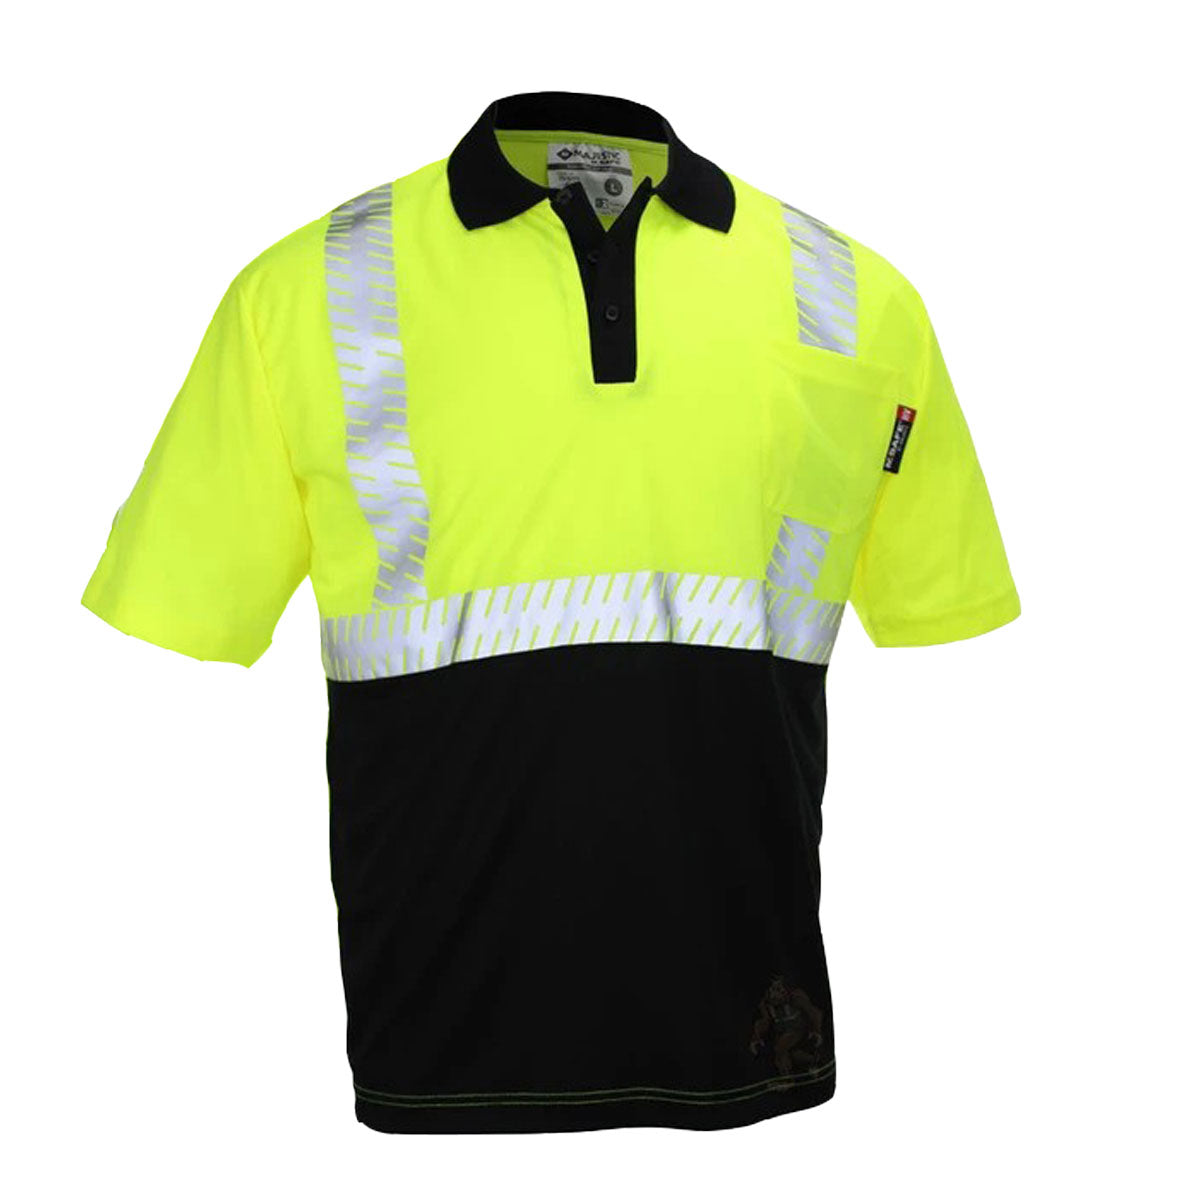 75-5213 - Majestic Glove High Visibility Class 2 Polo Shirt